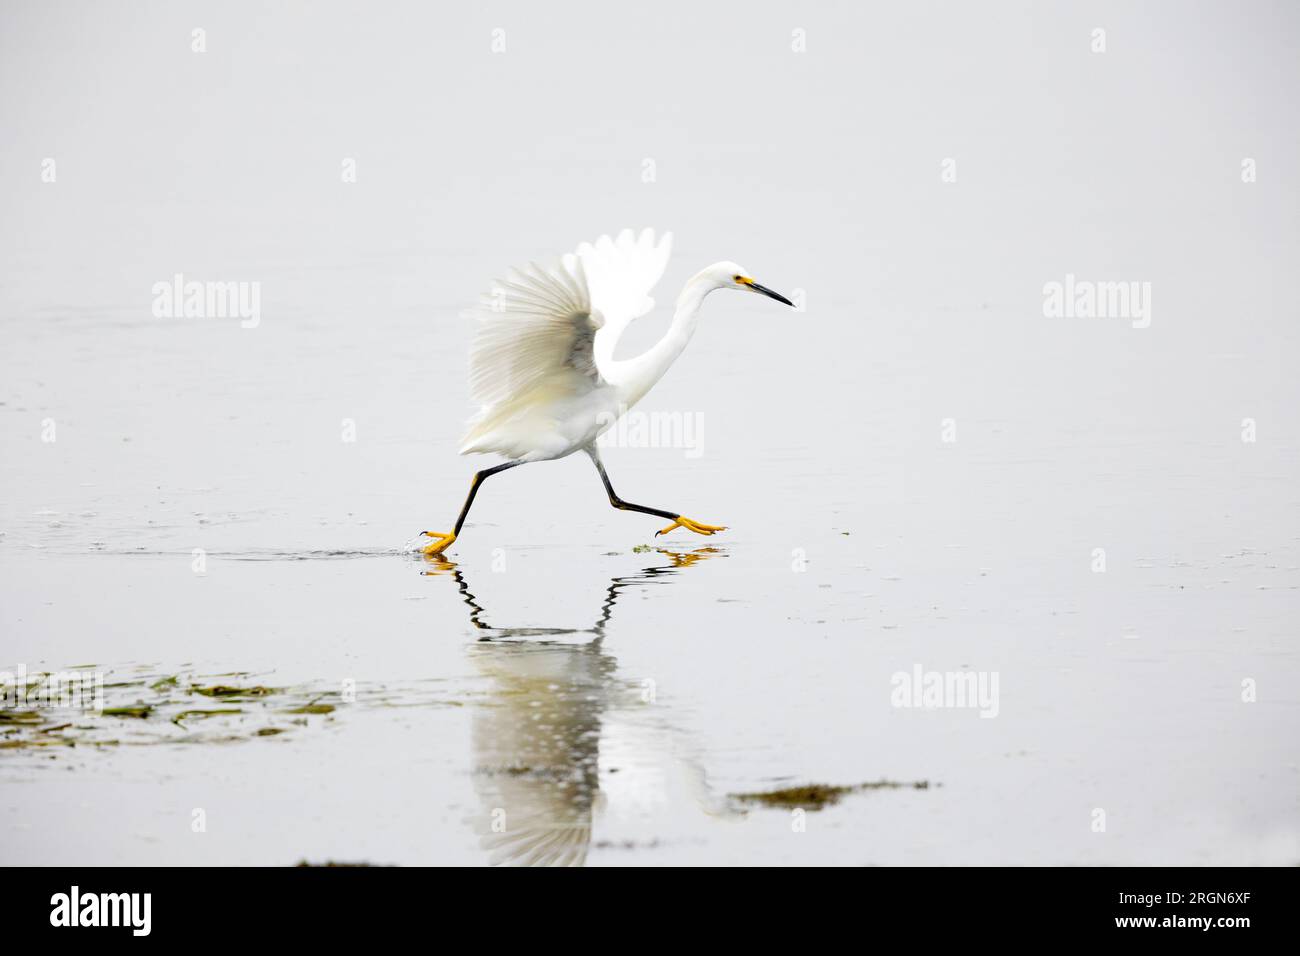 Snowy Egret Actively Running Hunting in Water Stock Photo